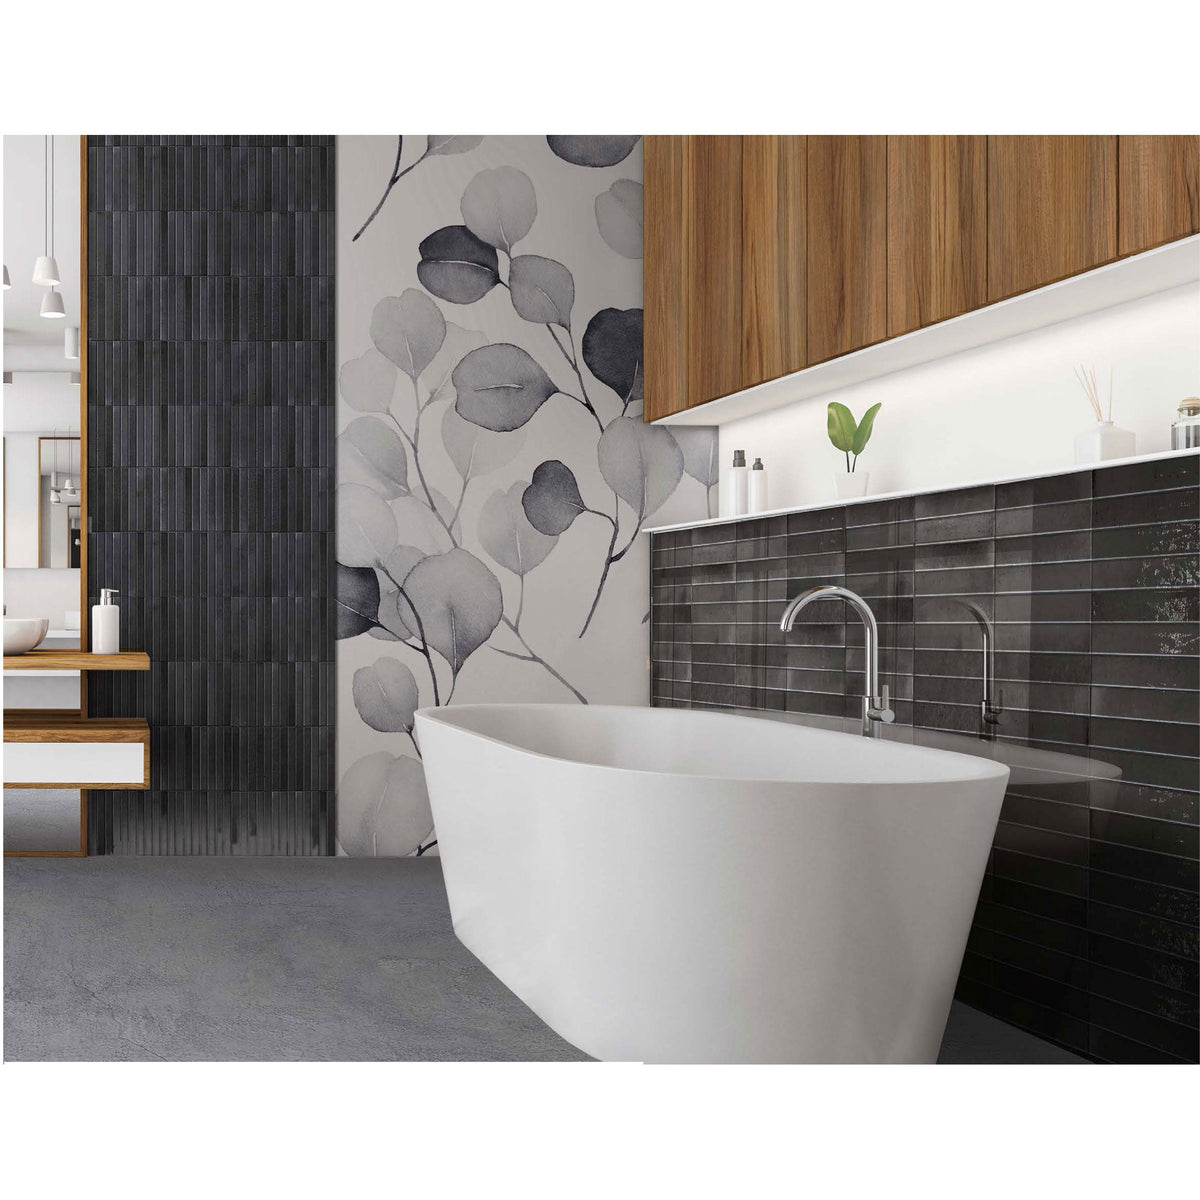 Cobsa - Homey Series 3 in. x 10 in. Porcelain Subway Tile - Licorice Installed